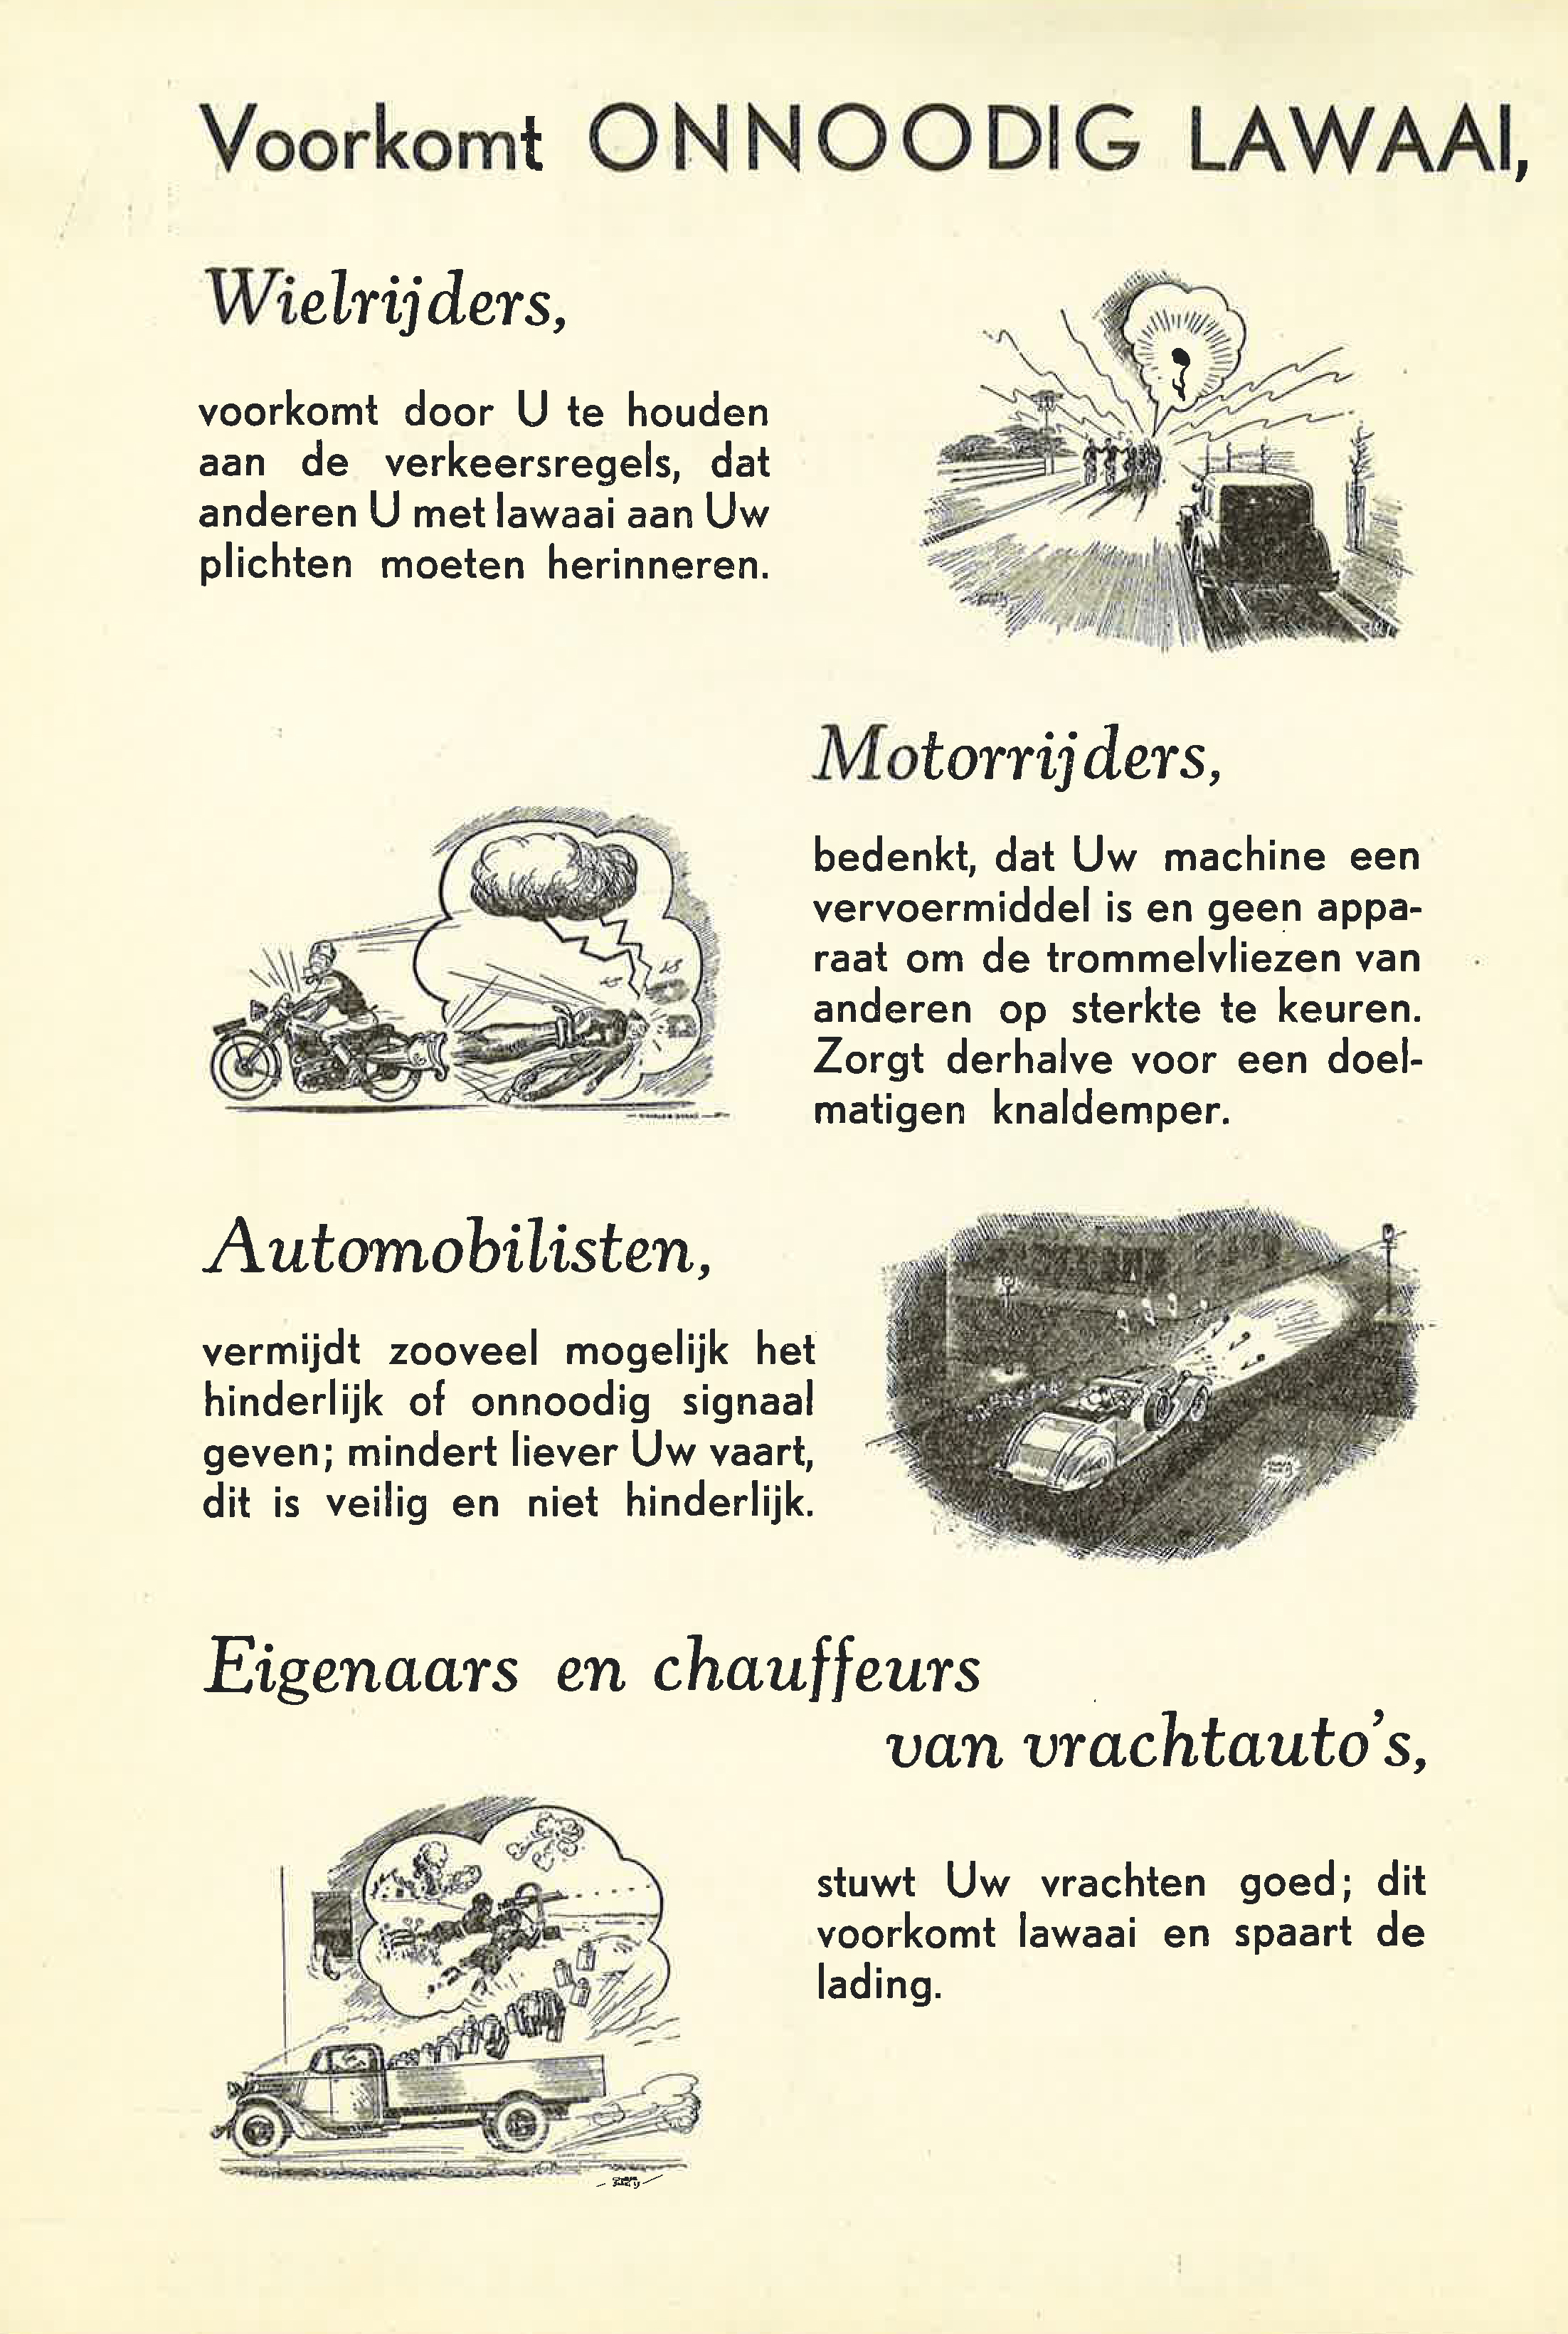 "Prevent Unnecessary Noise," second page from the Leaflet "Anti-Noise Week," September 23-28, 1935, The Hague, The Netherlands. From Archives Sound Foundation (Geluidstichting) (1933-1942), stored at the archives of the Nieuwegein, The Netherlands. Courtesy Nederlands Akoestisch Genootschap.